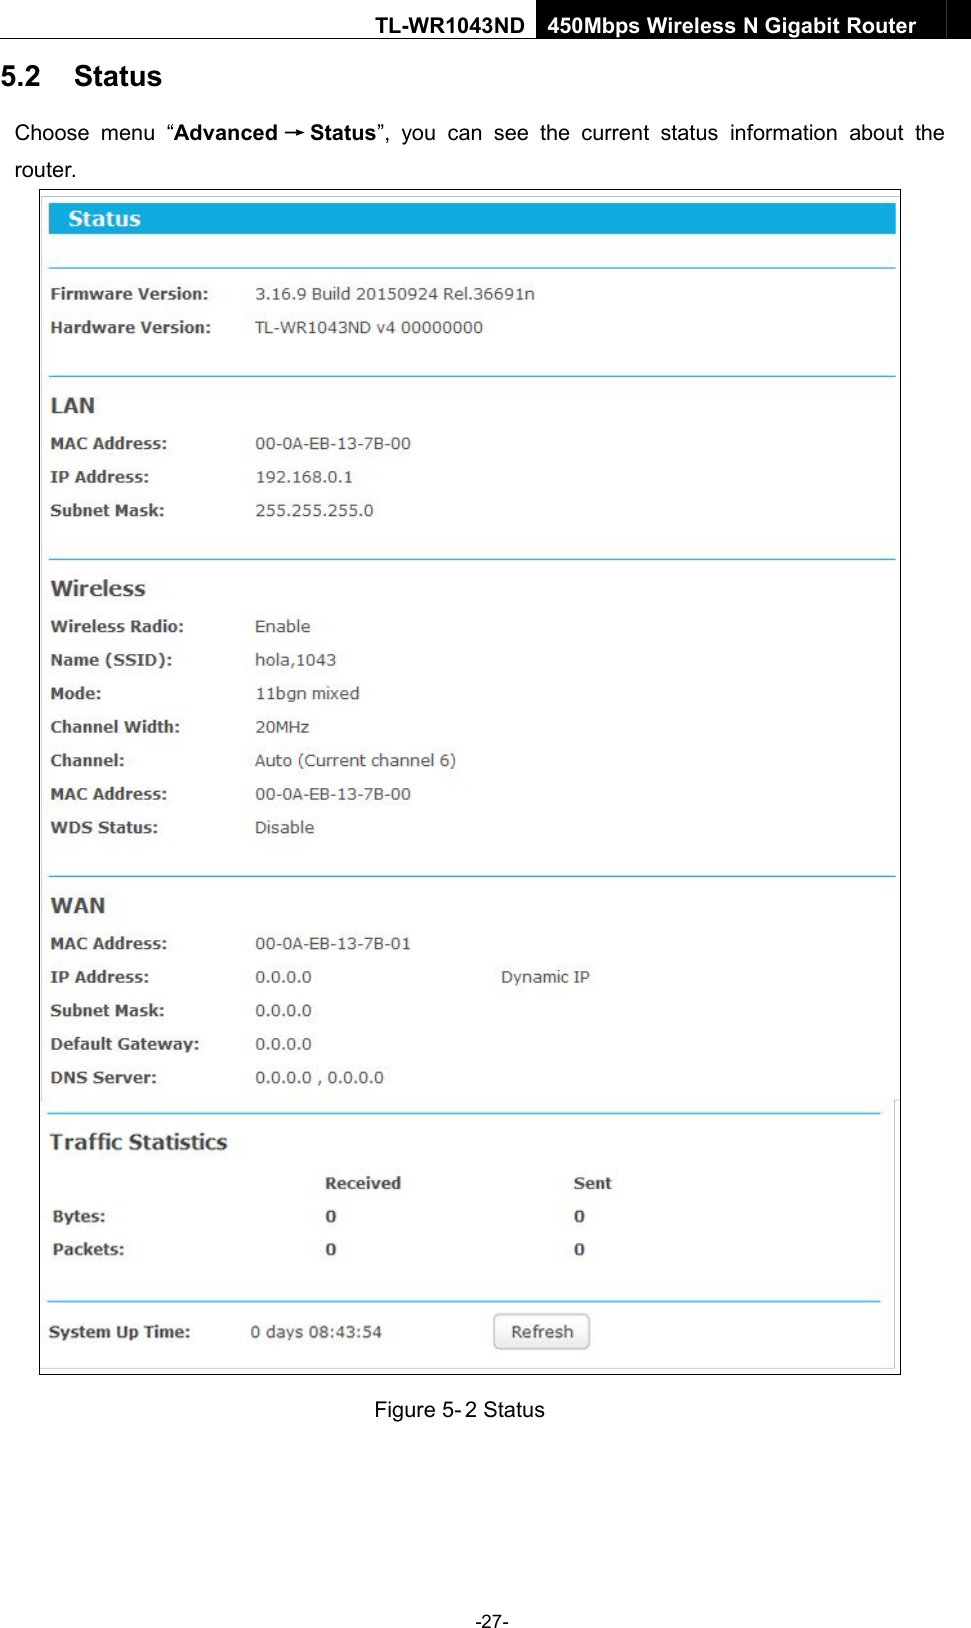 -27-TL-WR1043ND450Mbps Wireless N Gigabit Router5.2 StatusChoose menu “Advanced →Status”, you can see the current status information about therouter.Figure 5- 2 Status